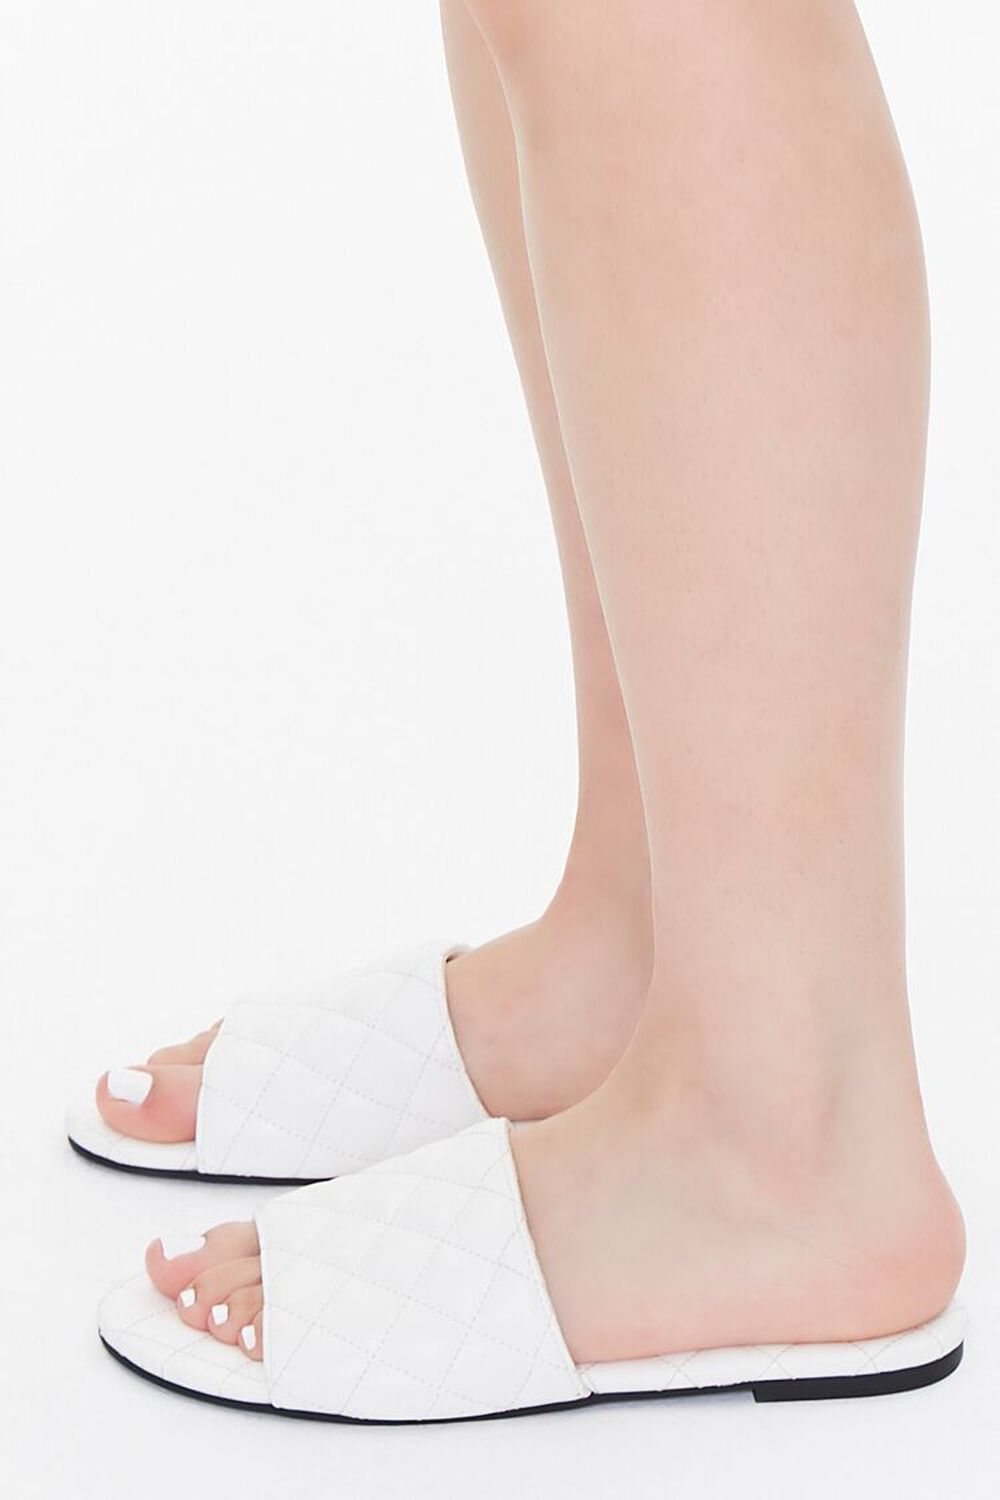 WHITE Quilted Slip-On Sandals, image 2